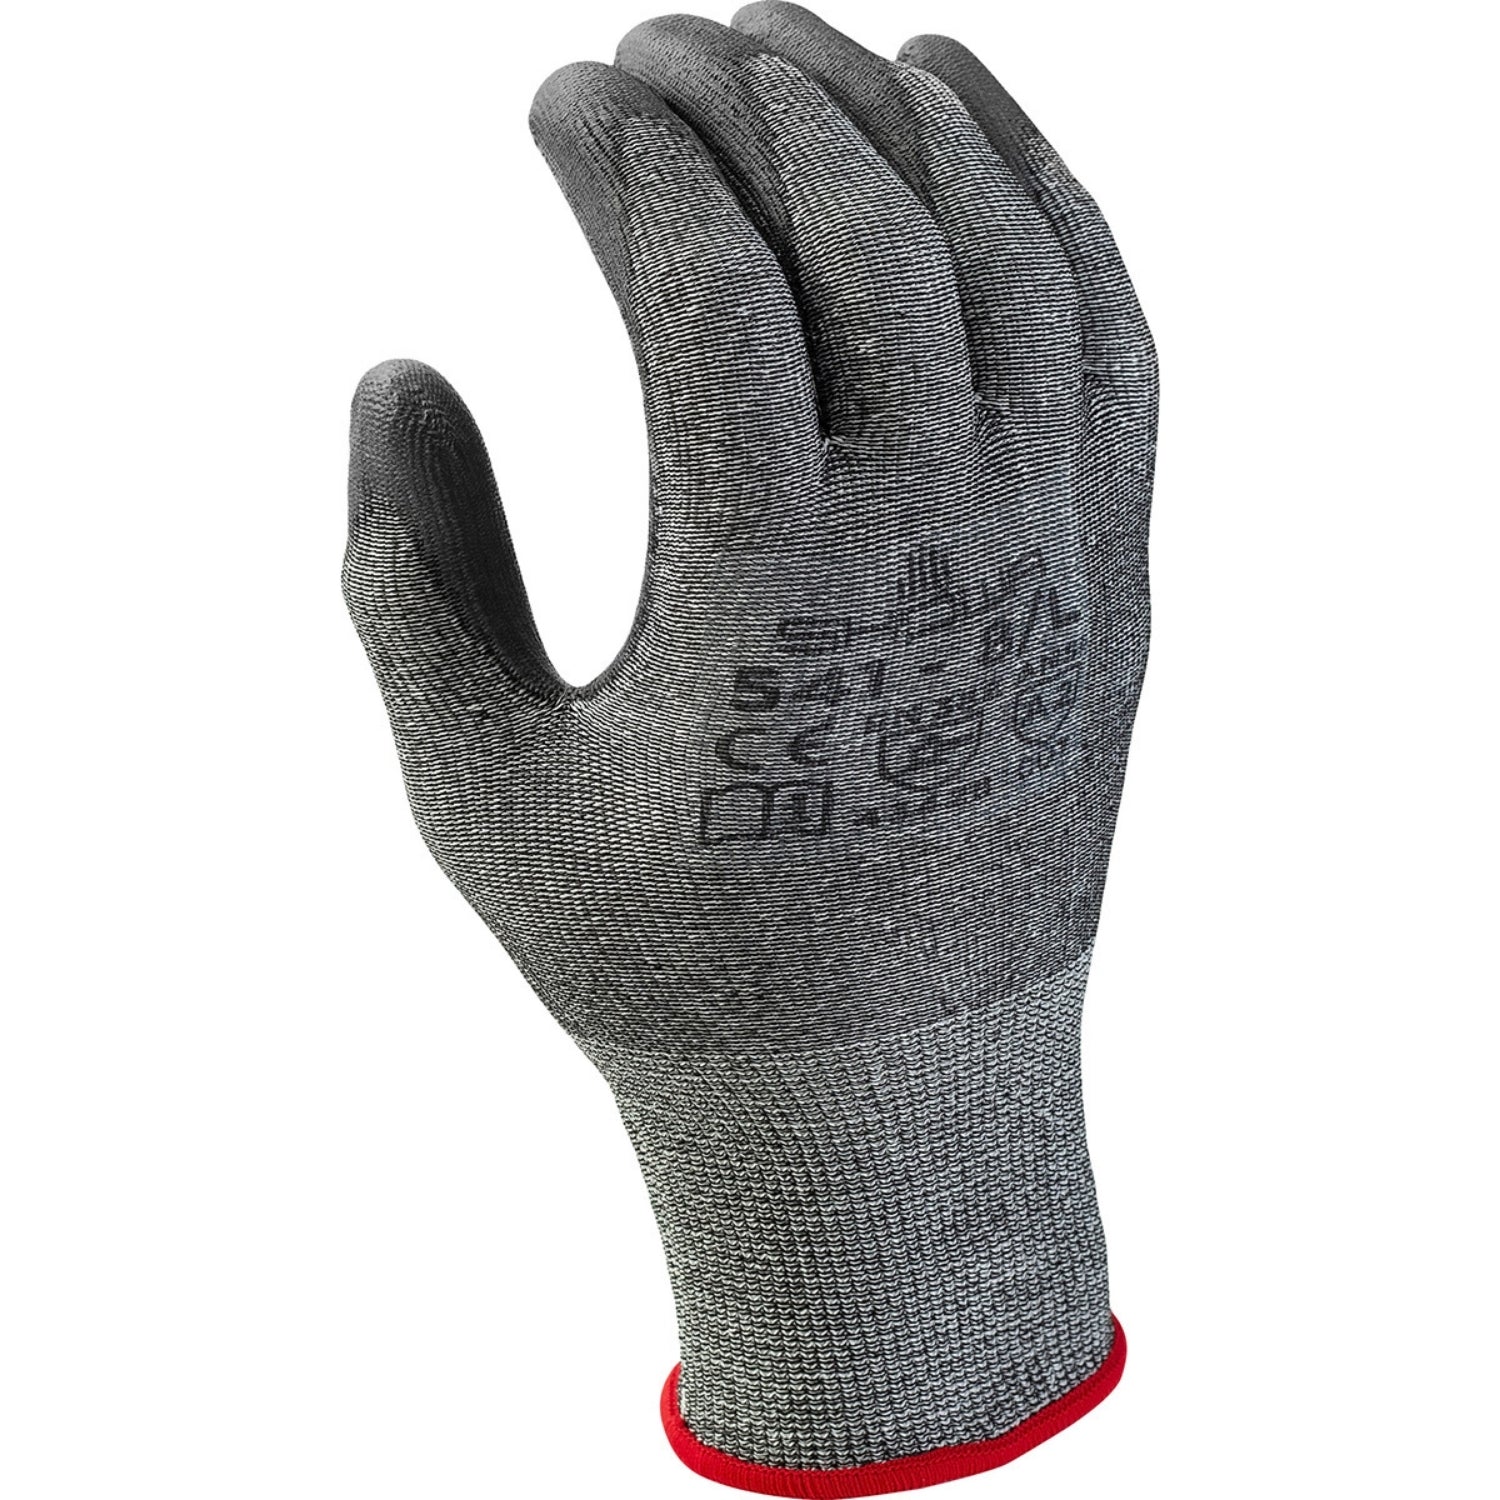 SHOWA 541 - Cut Resistant Gloves 12 Pack